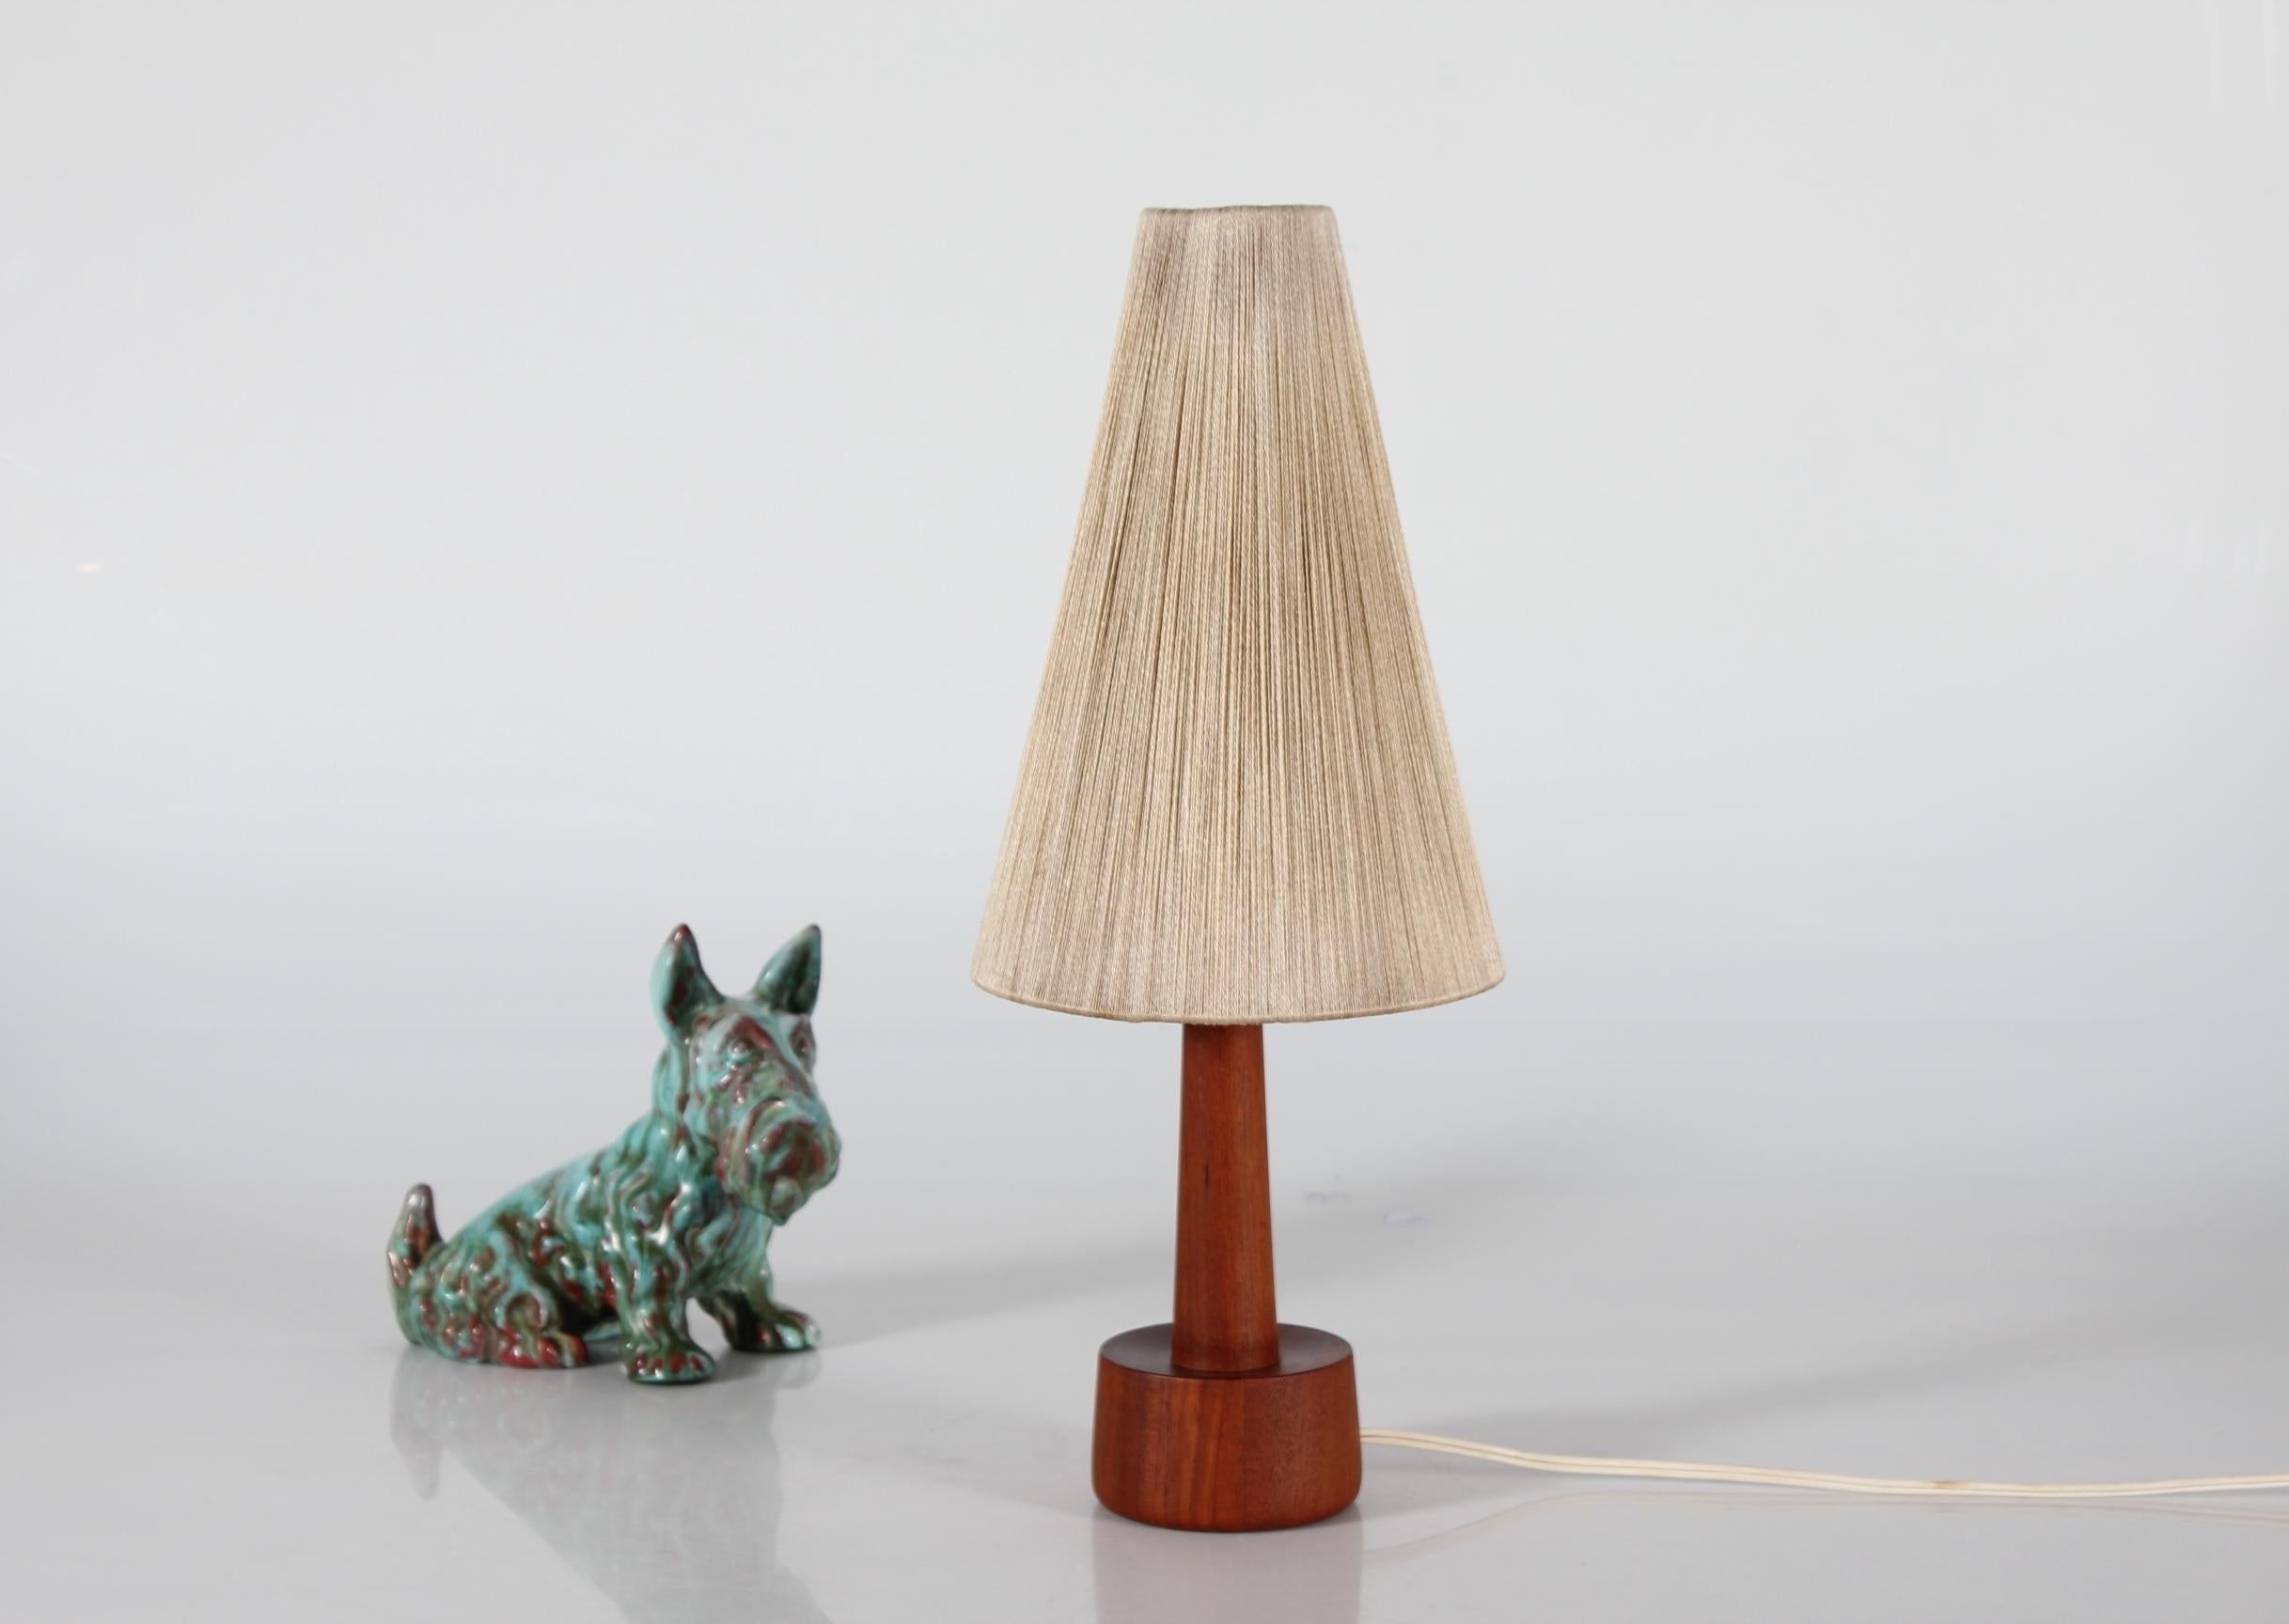 Late 20th Century Danish Modernist Table Lamp of Teak with Cone-Shaped Yarn Shade 1970s For Sale